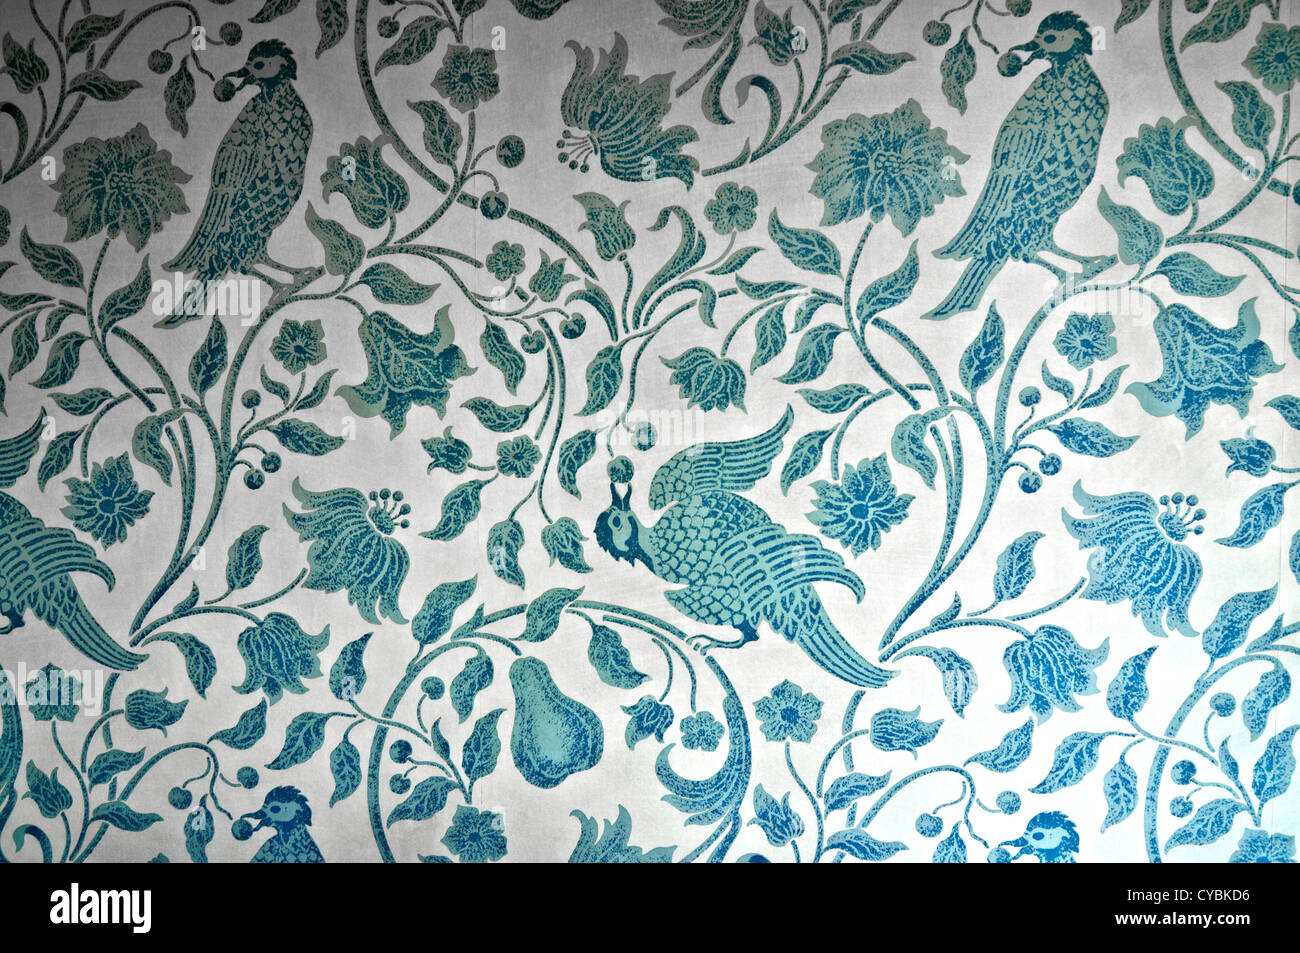 Patterned wallpaper Stock Photo